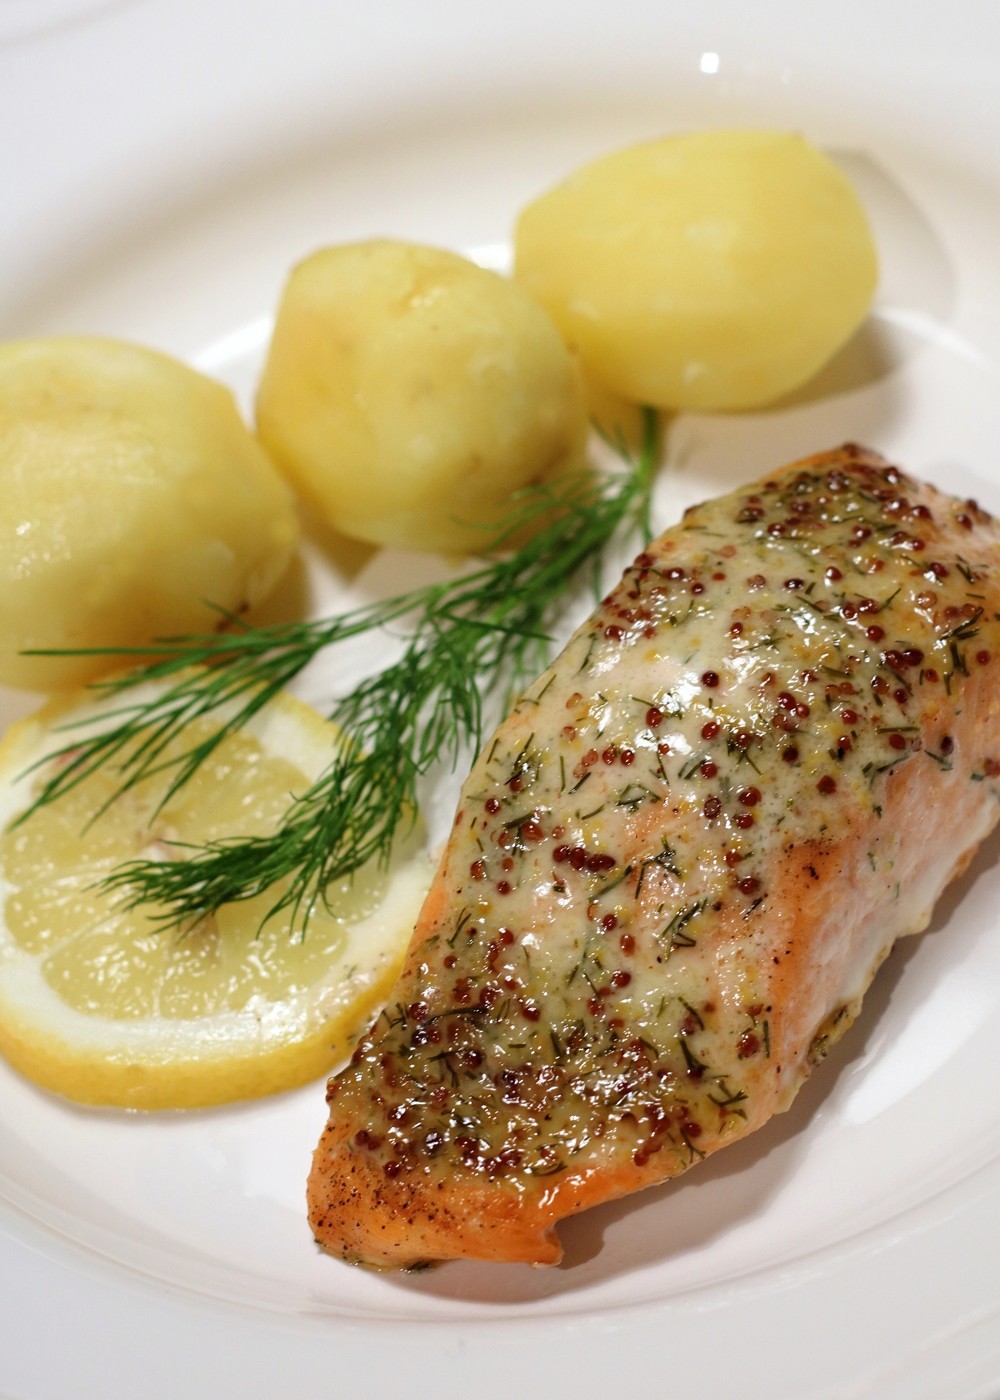 Lachs in Senf Dill Sauce000009